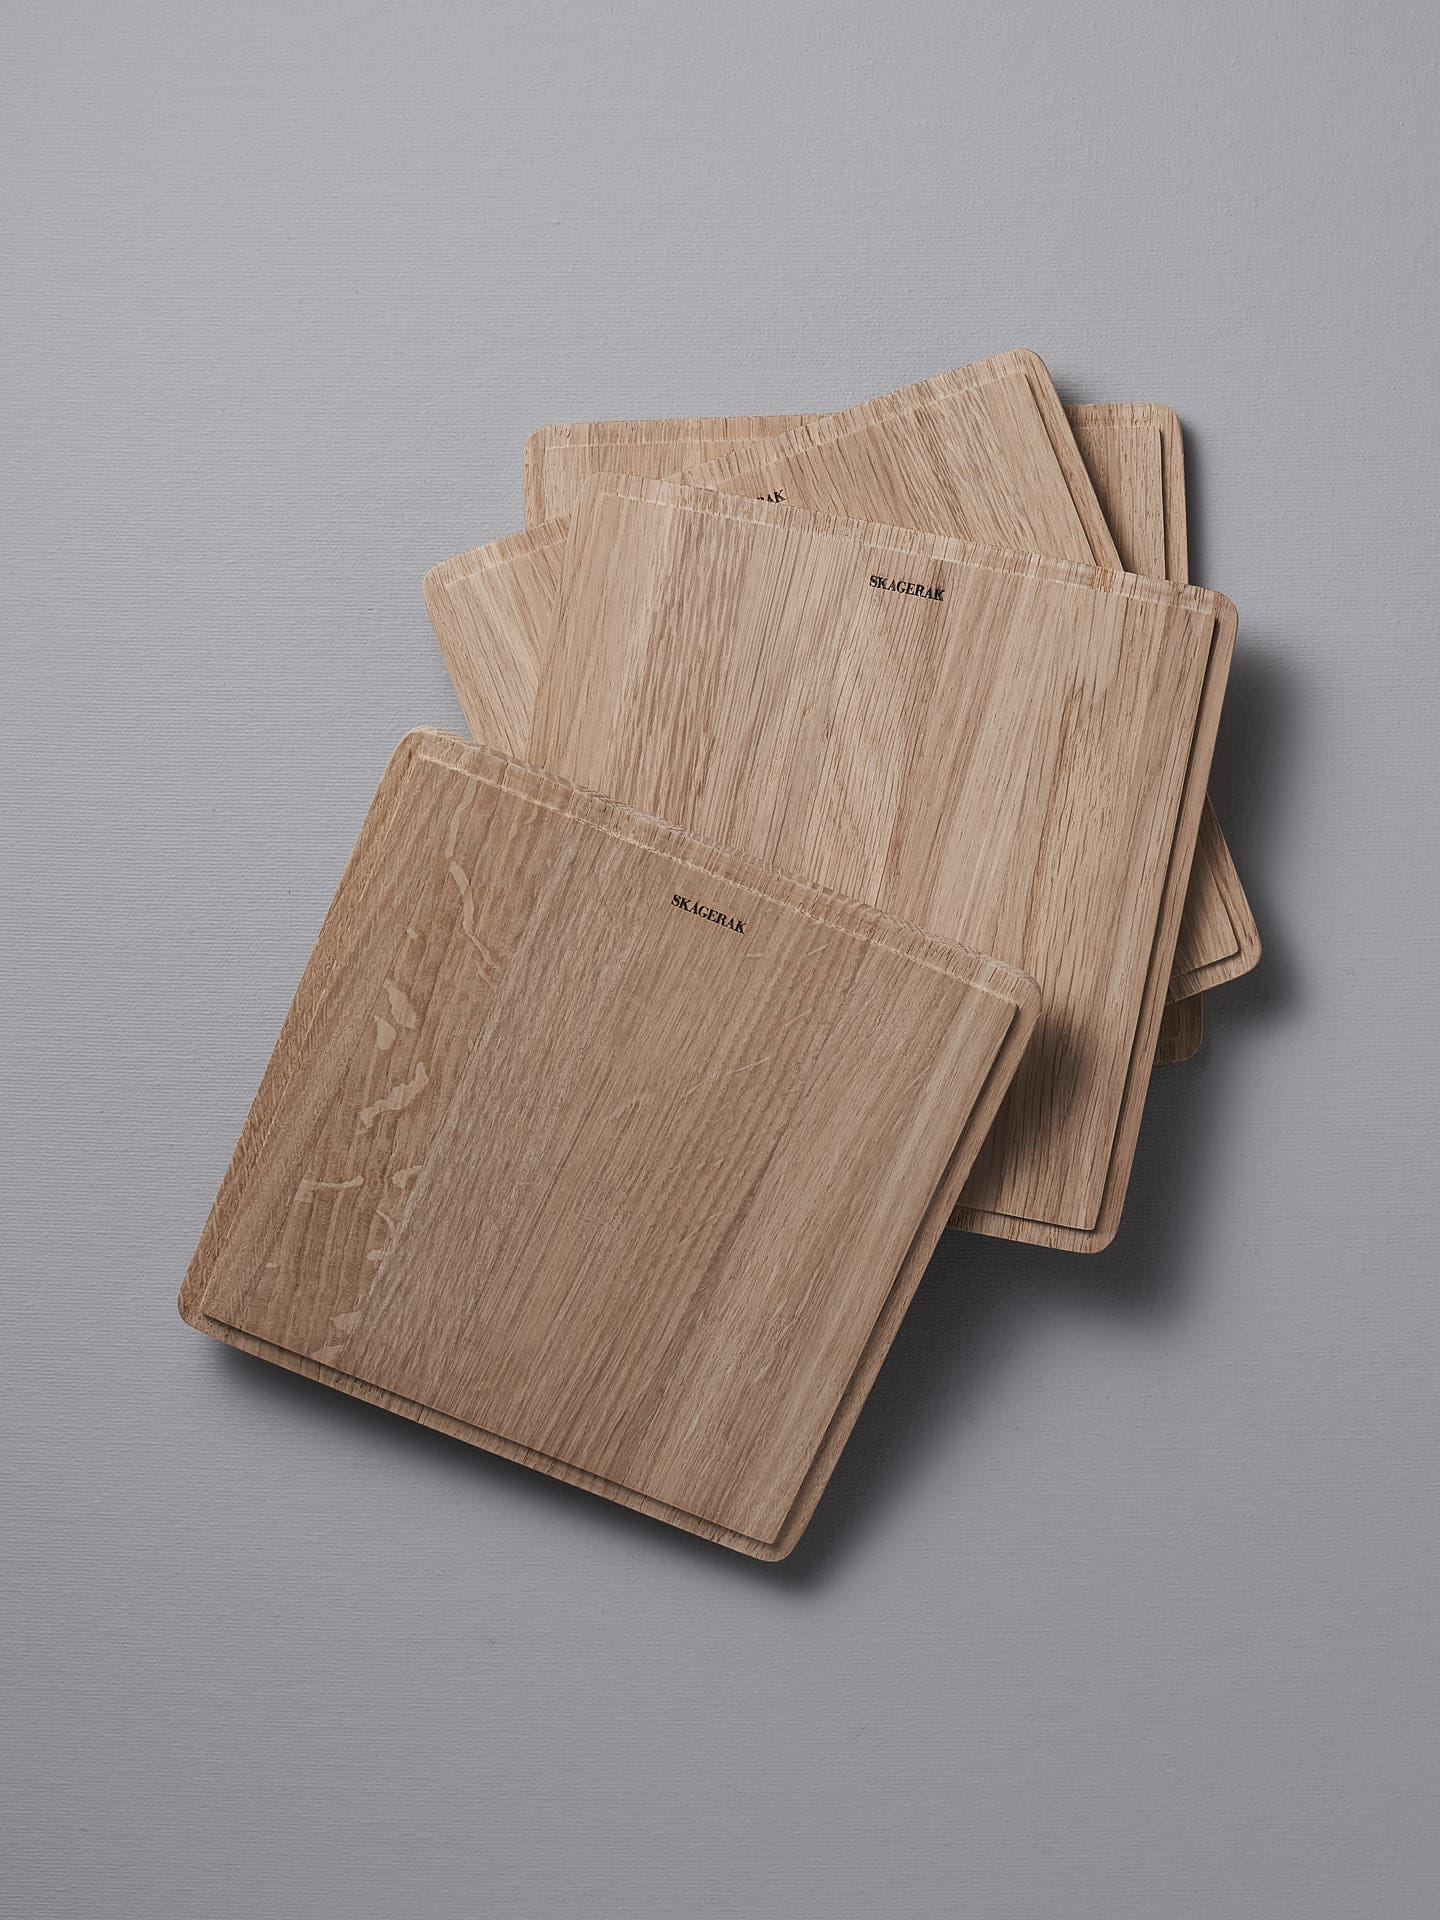 Four Skagerak Plank Square Trencher 4pcs - Oak cutting boards on a grey surface.